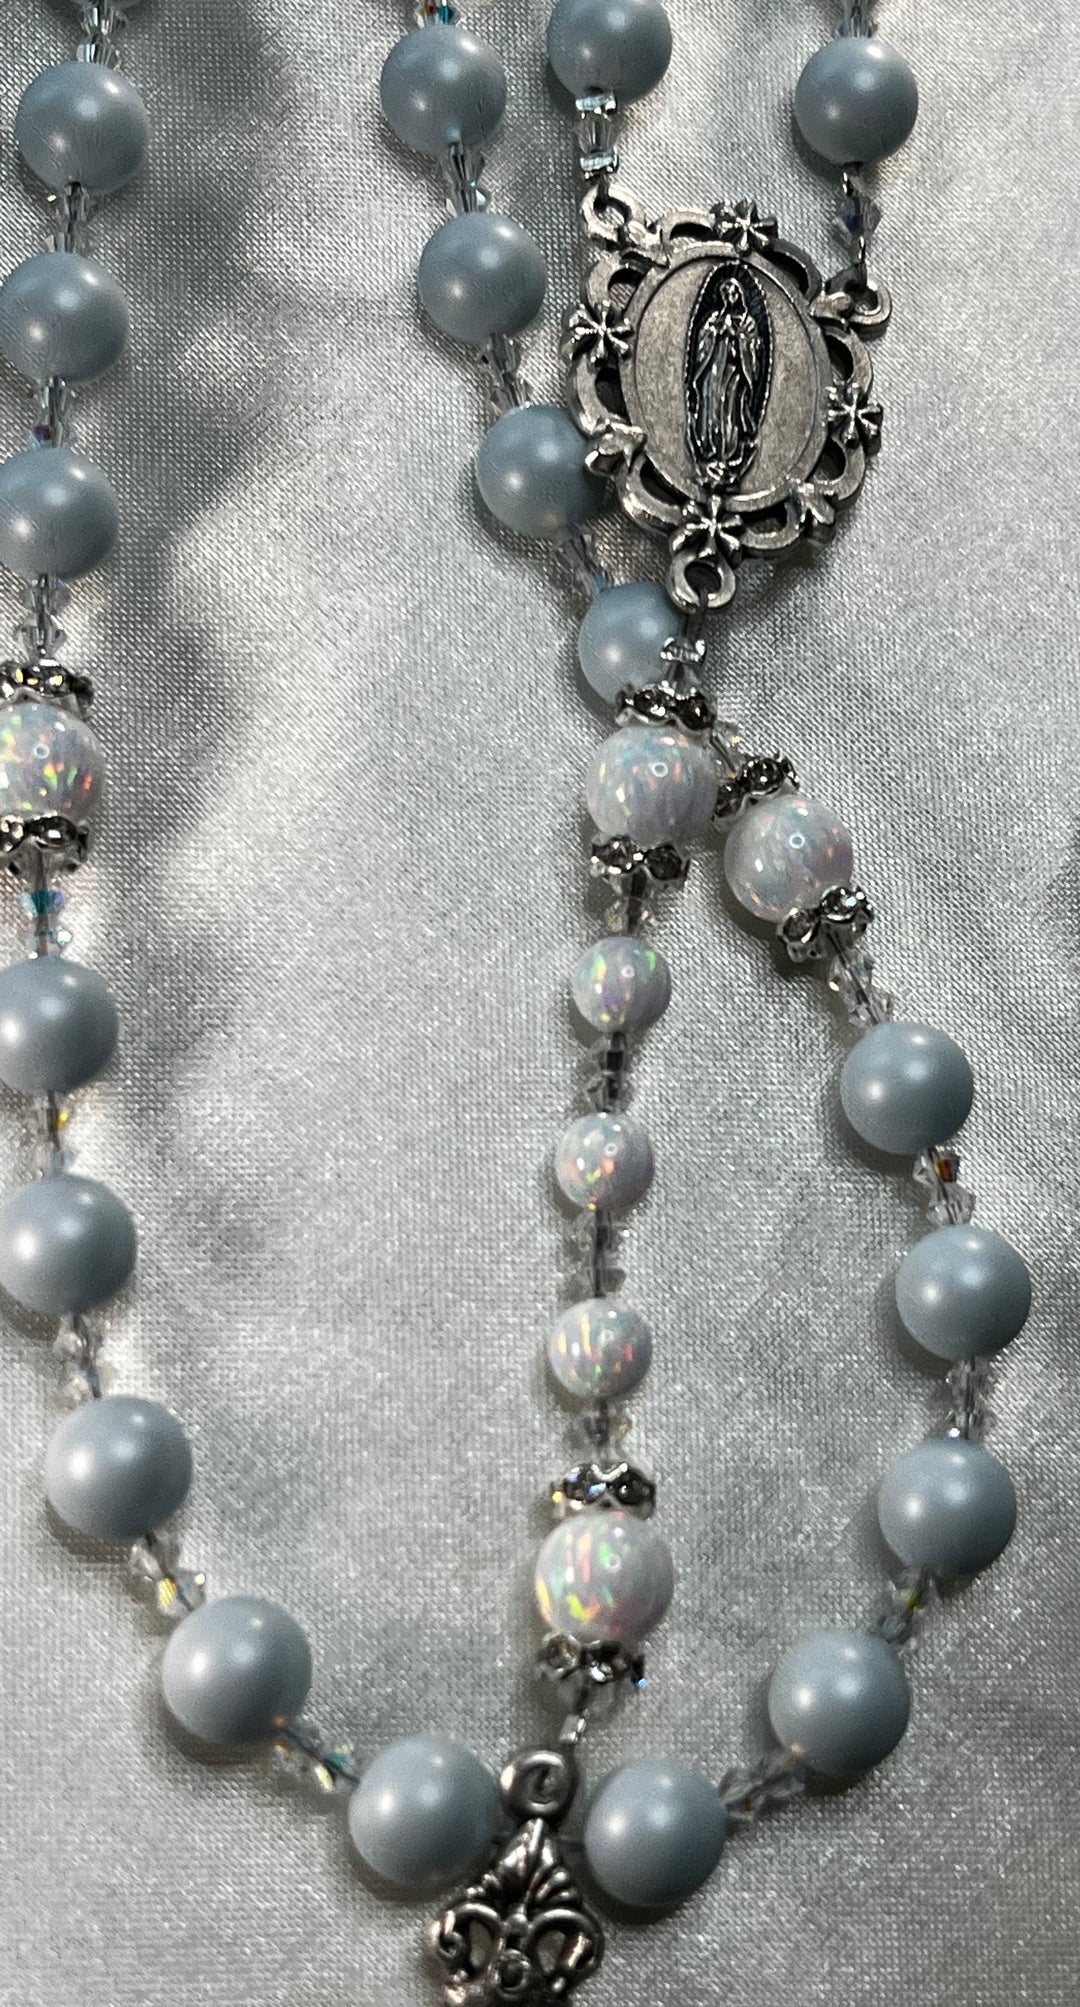 White Opals, Pastel Blue Swarovski Pearls, Rhinestone spacers, Scallop Lady of Guadalupe Centerpiece